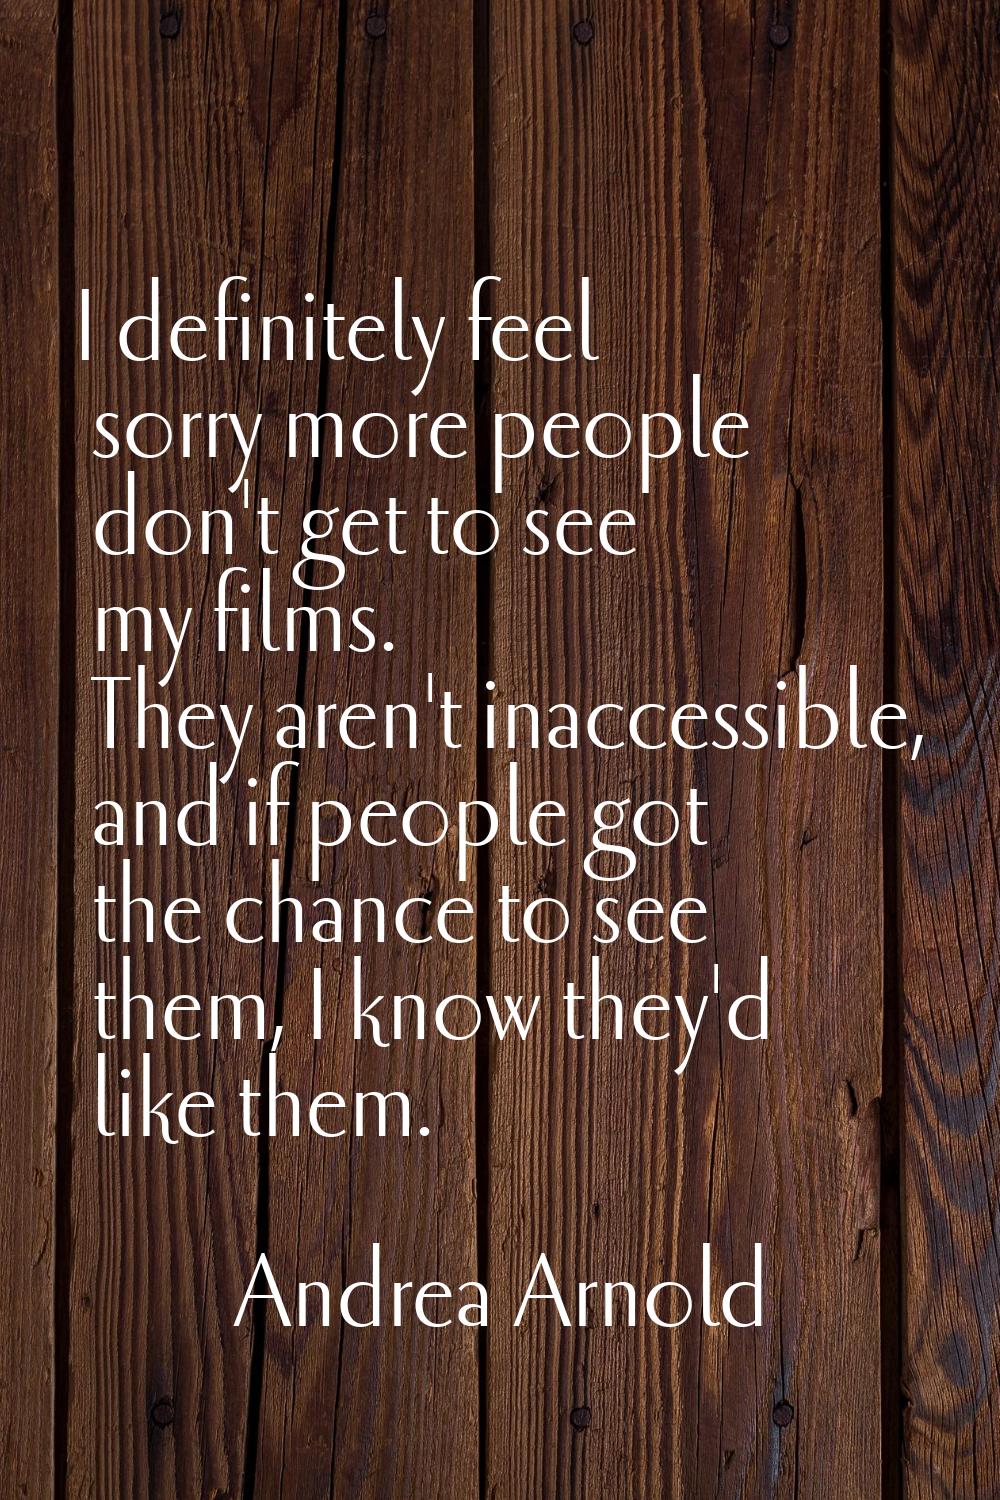 I definitely feel sorry more people don't get to see my films. They aren't inaccessible, and if peo